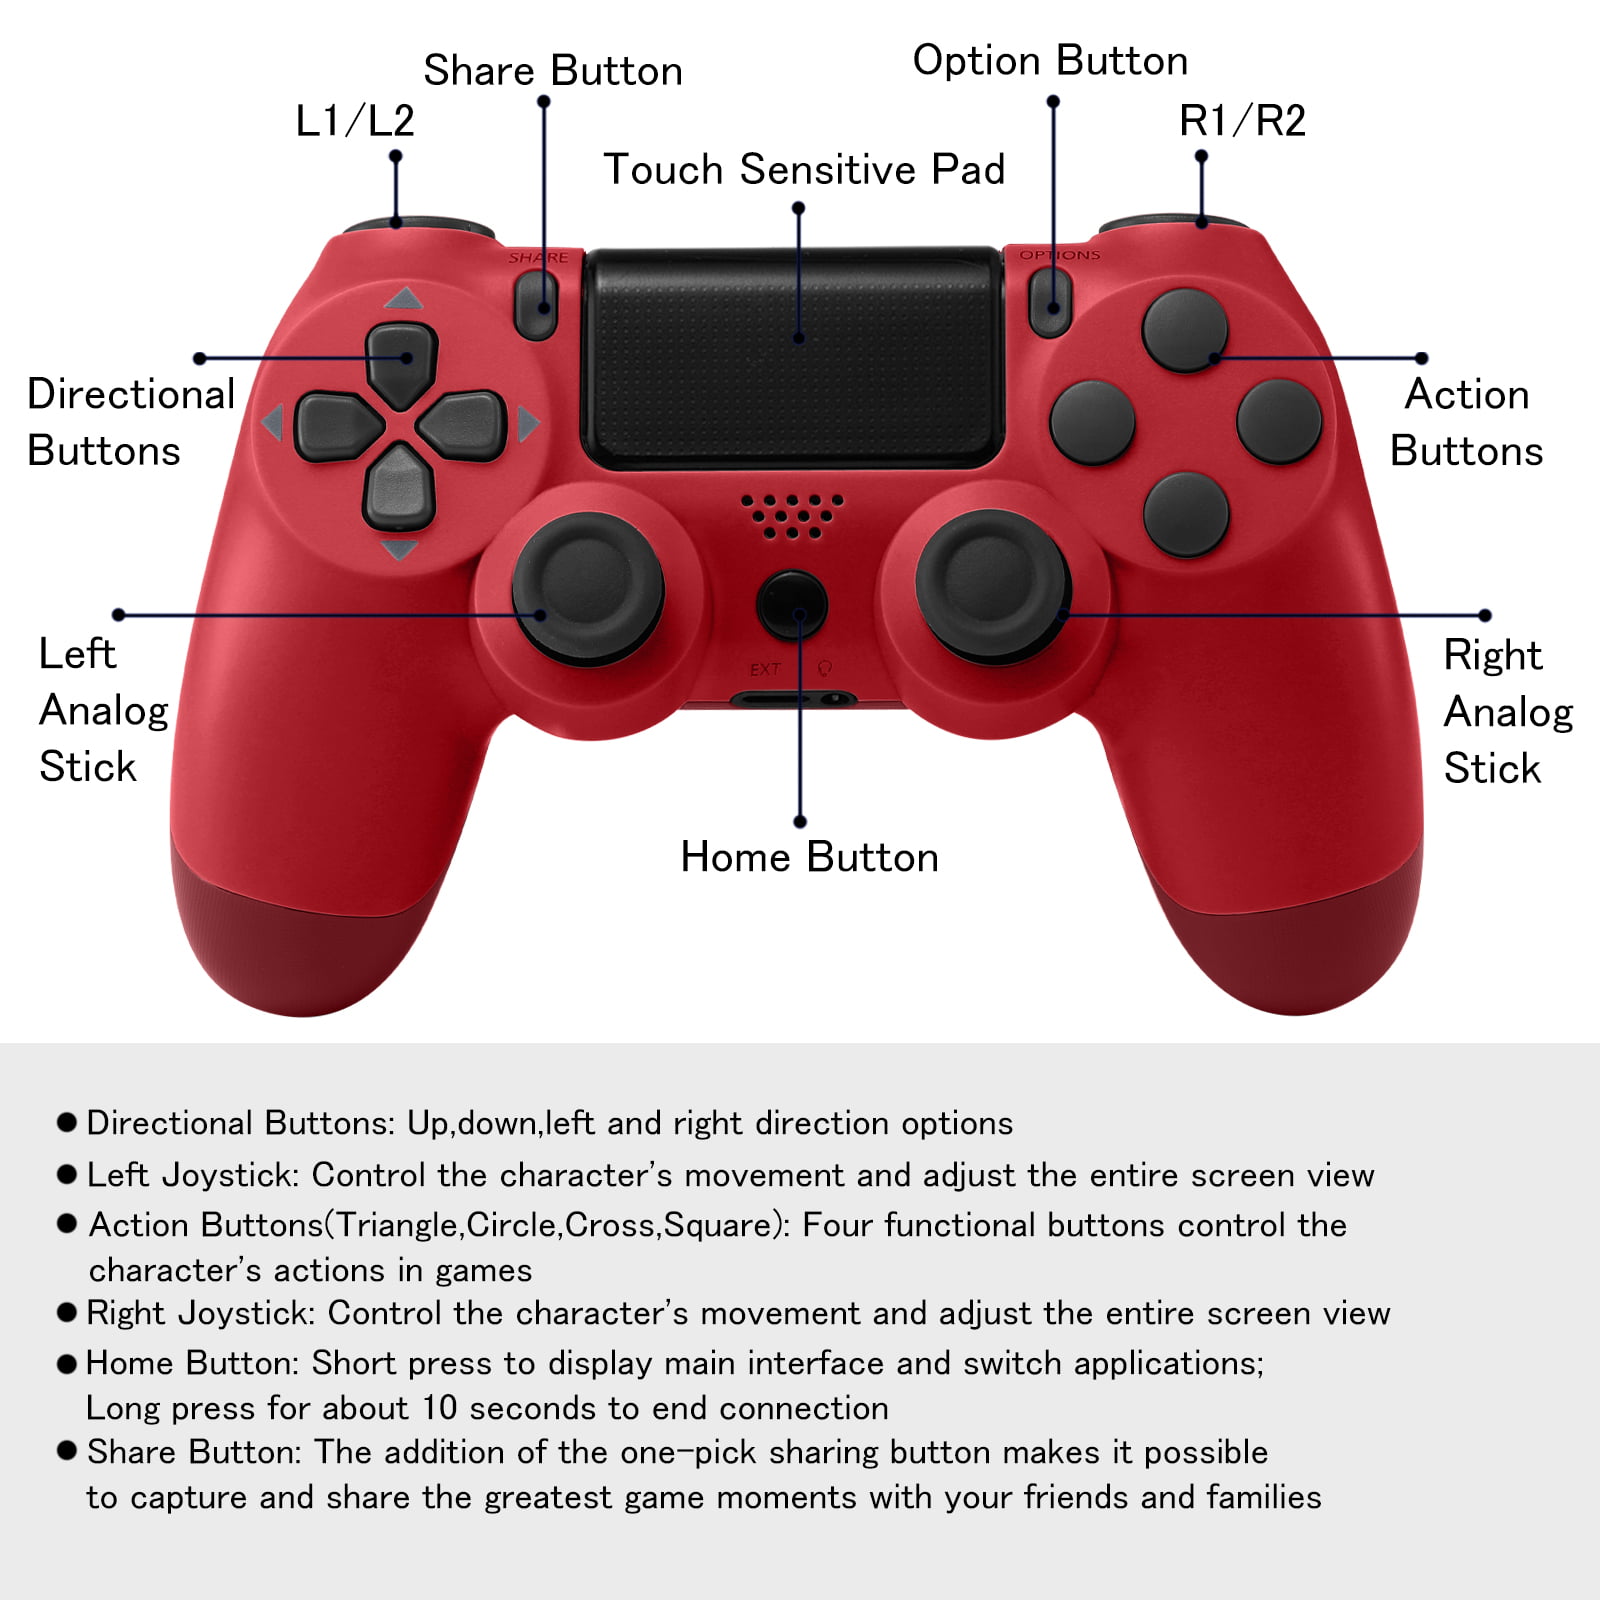 PLAYSTATION buttons. Left Analog Stick. Button options Gamepad. Rbutton где.